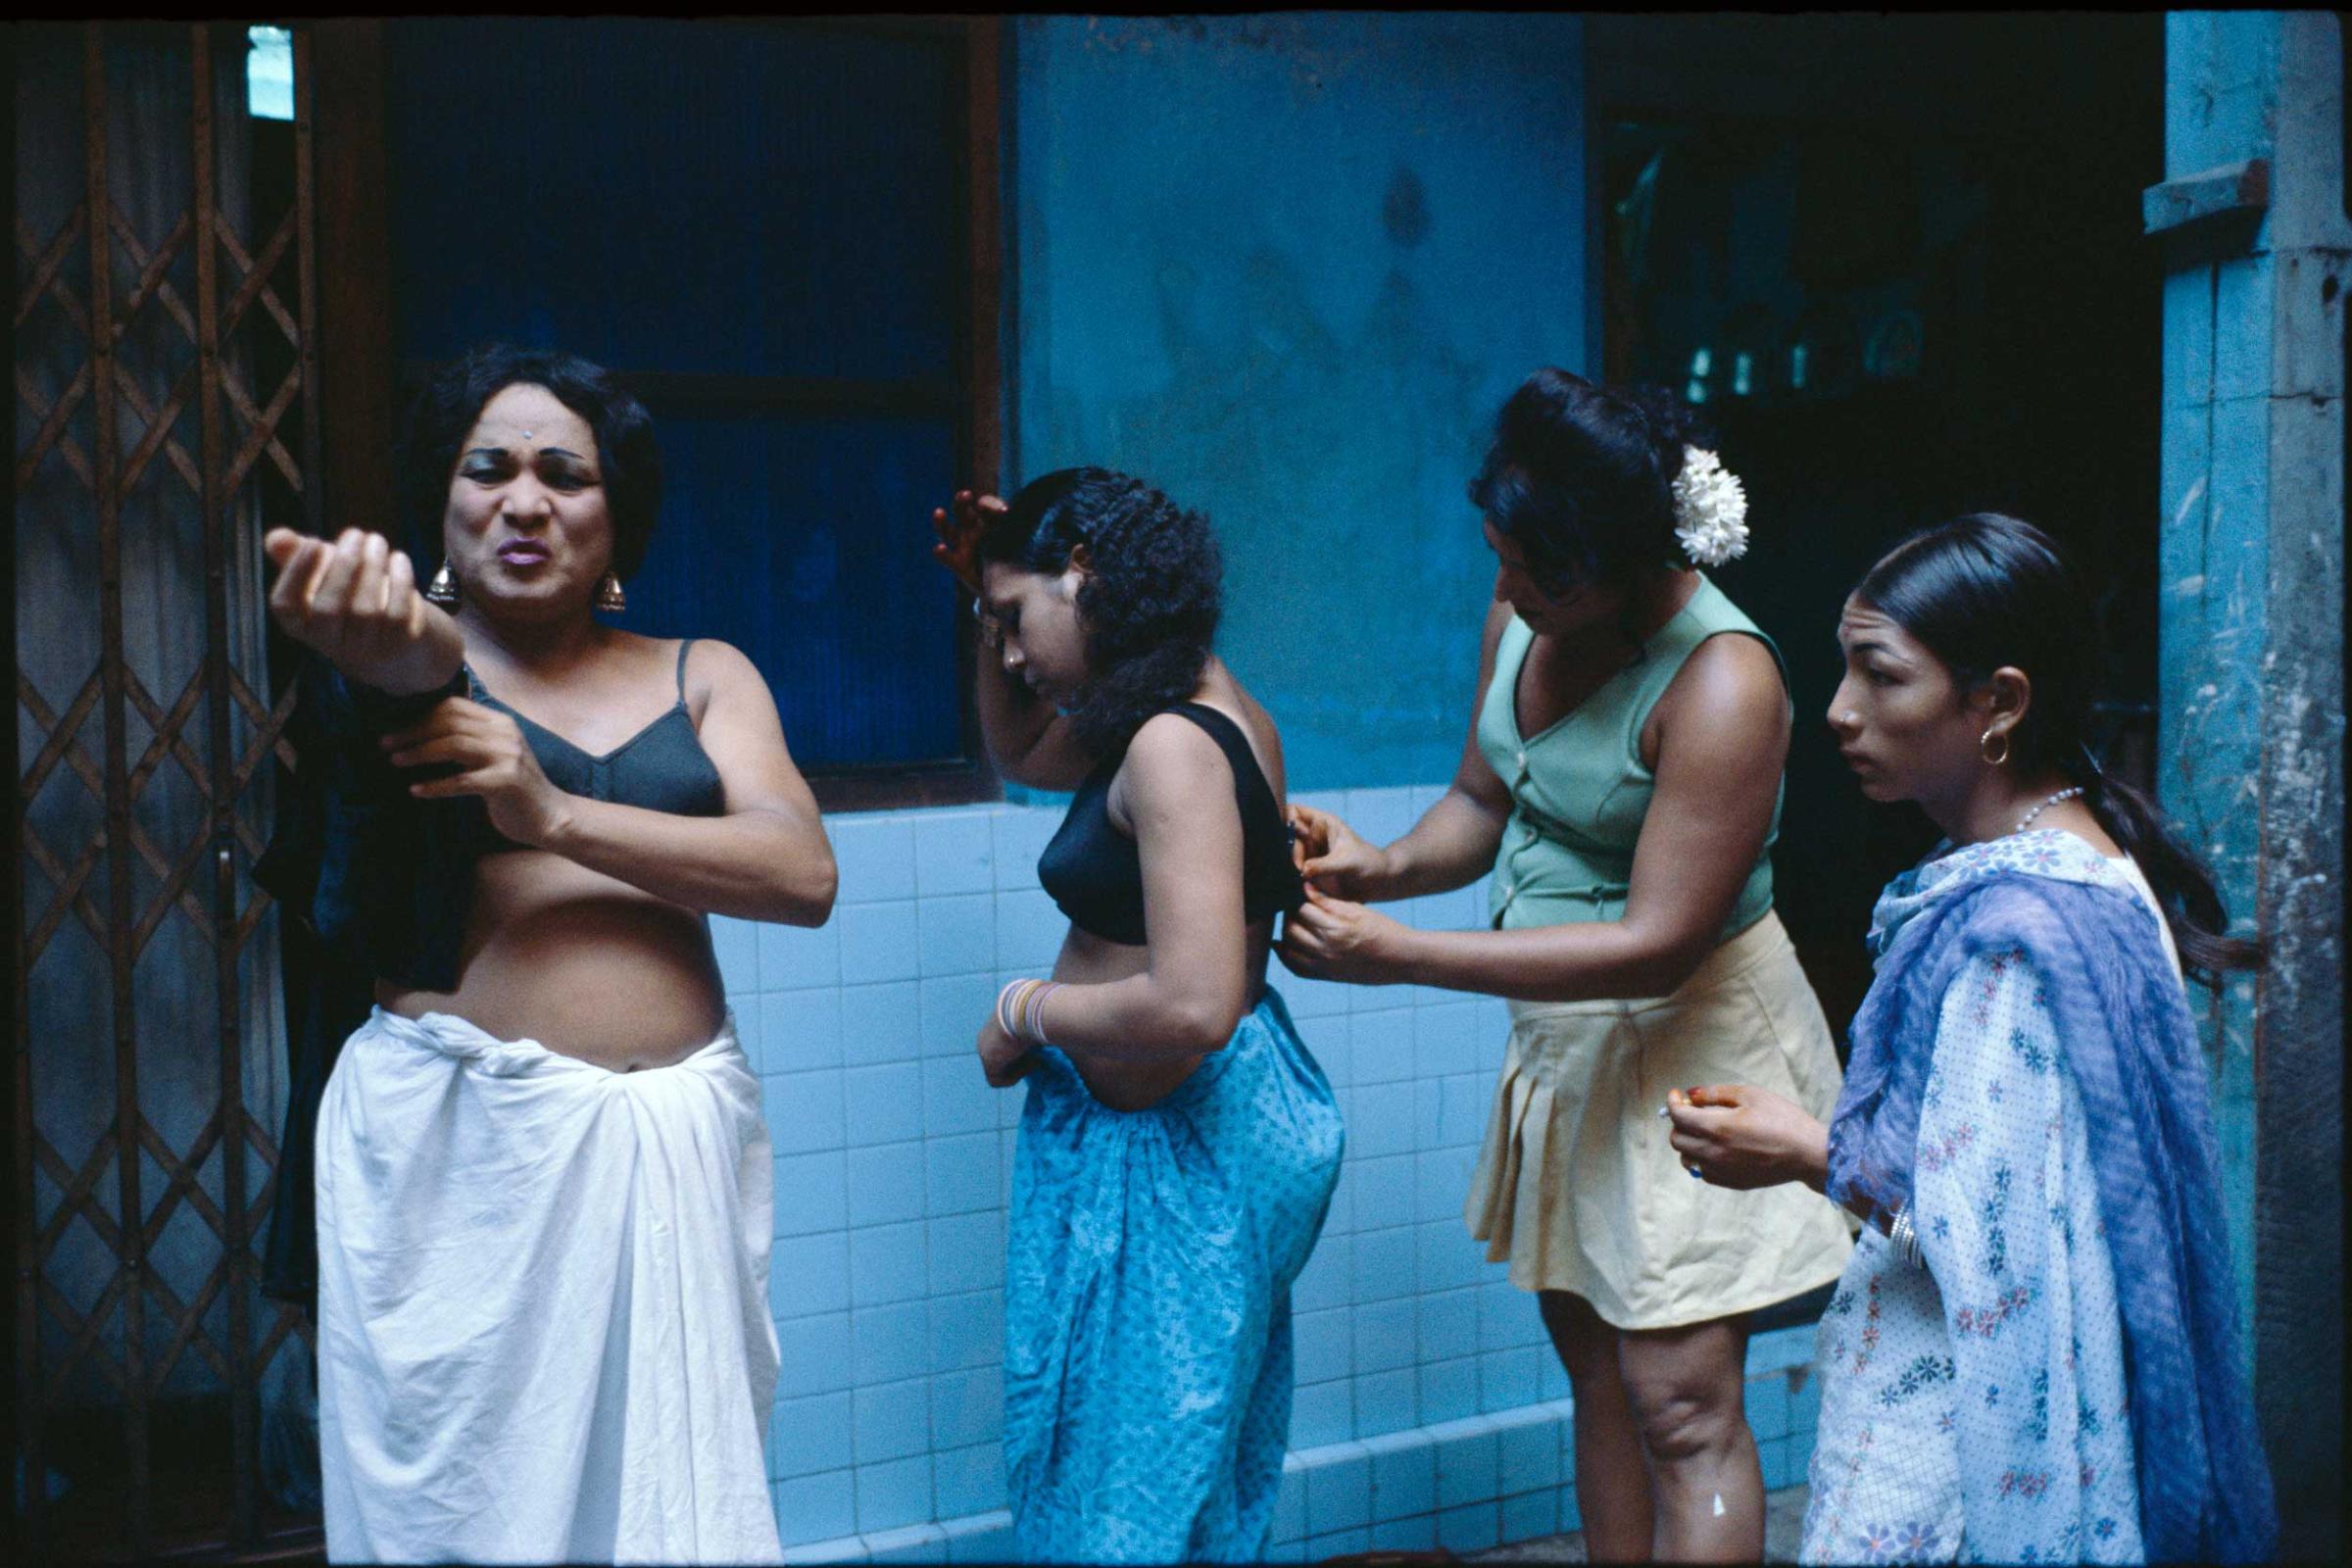 Transvestites getting dressed in a courtyard.